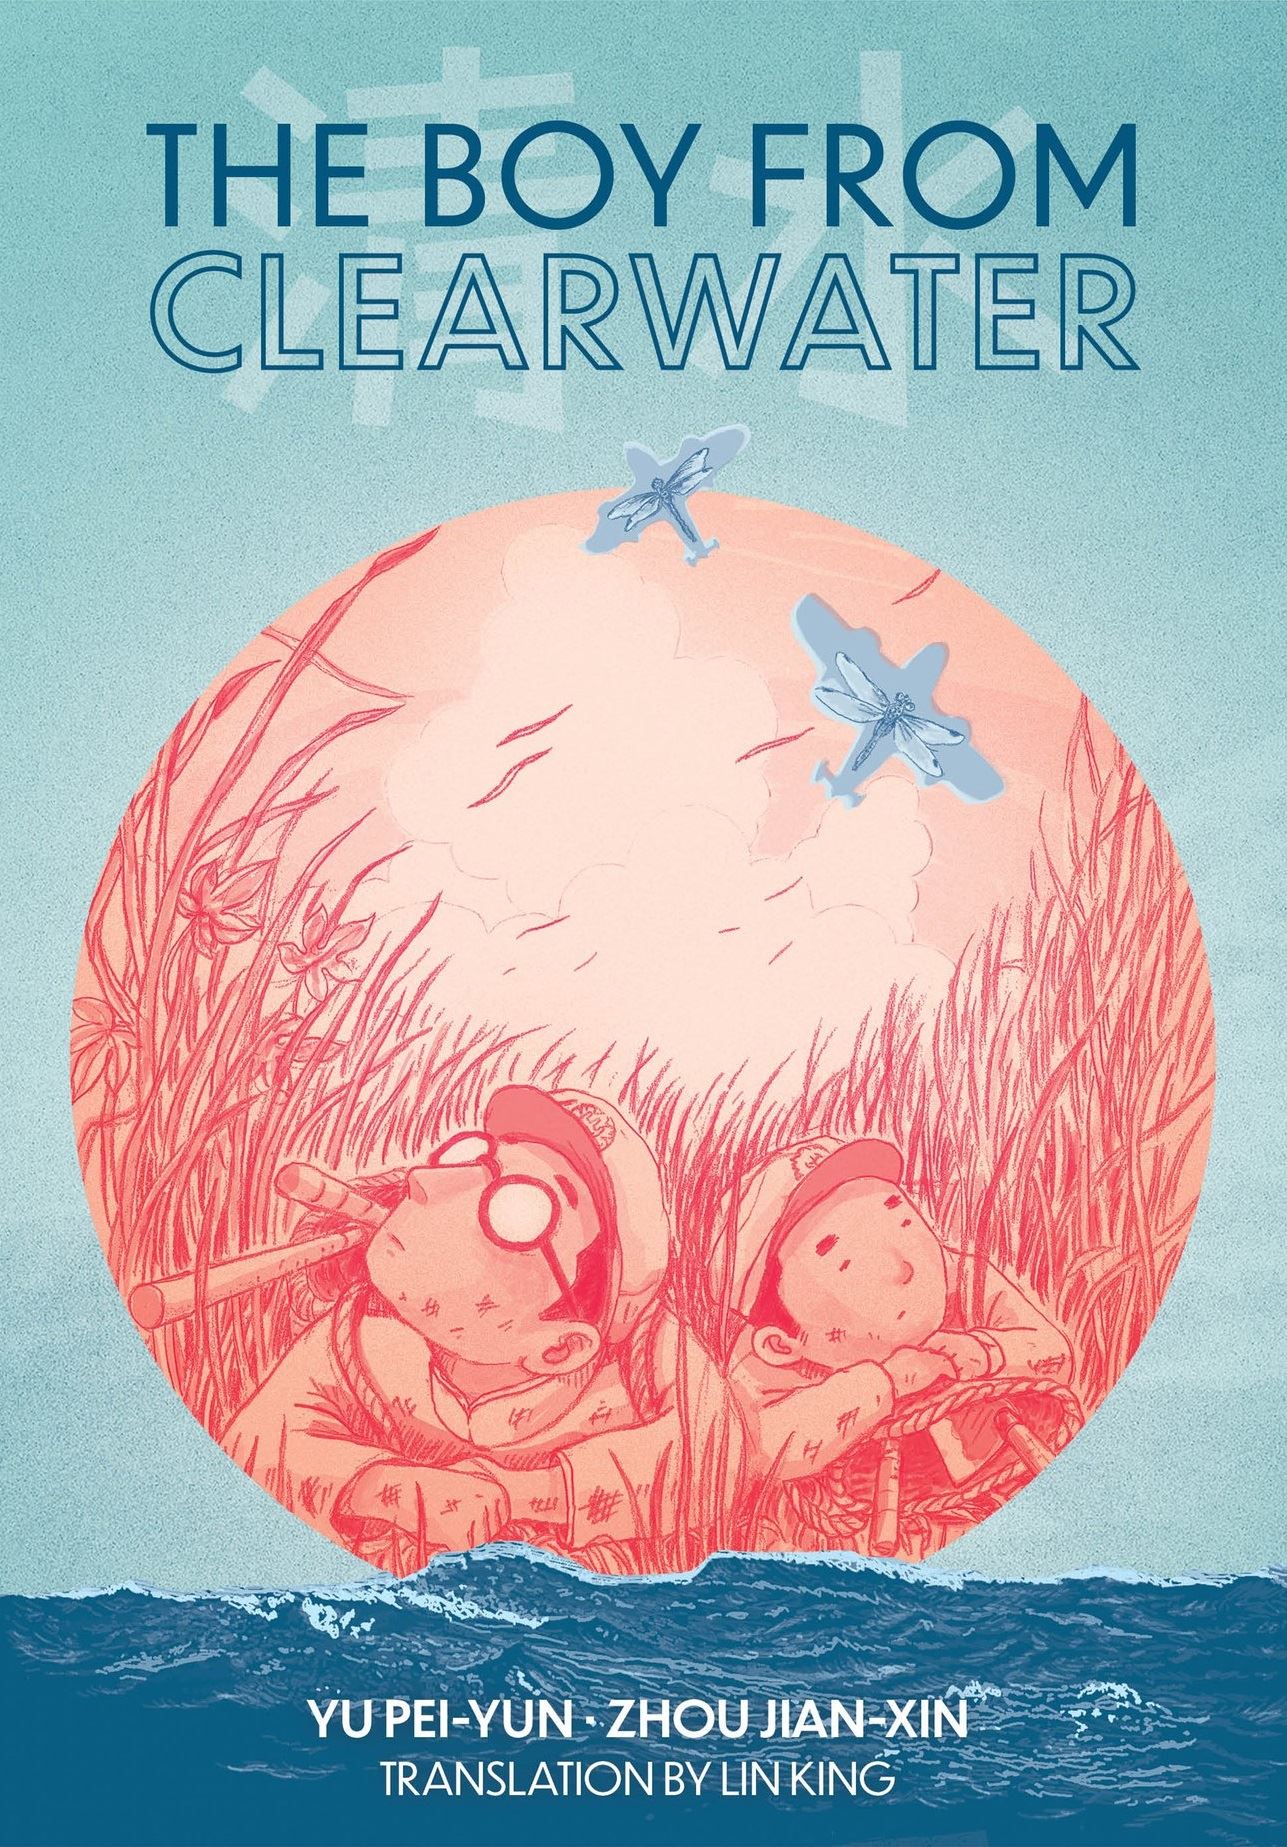 Book 1 of Acclaimed Taiwanese Graphic Novel “The Boy from Clear Water” to Hit the Shelves in the U.S. on November 21